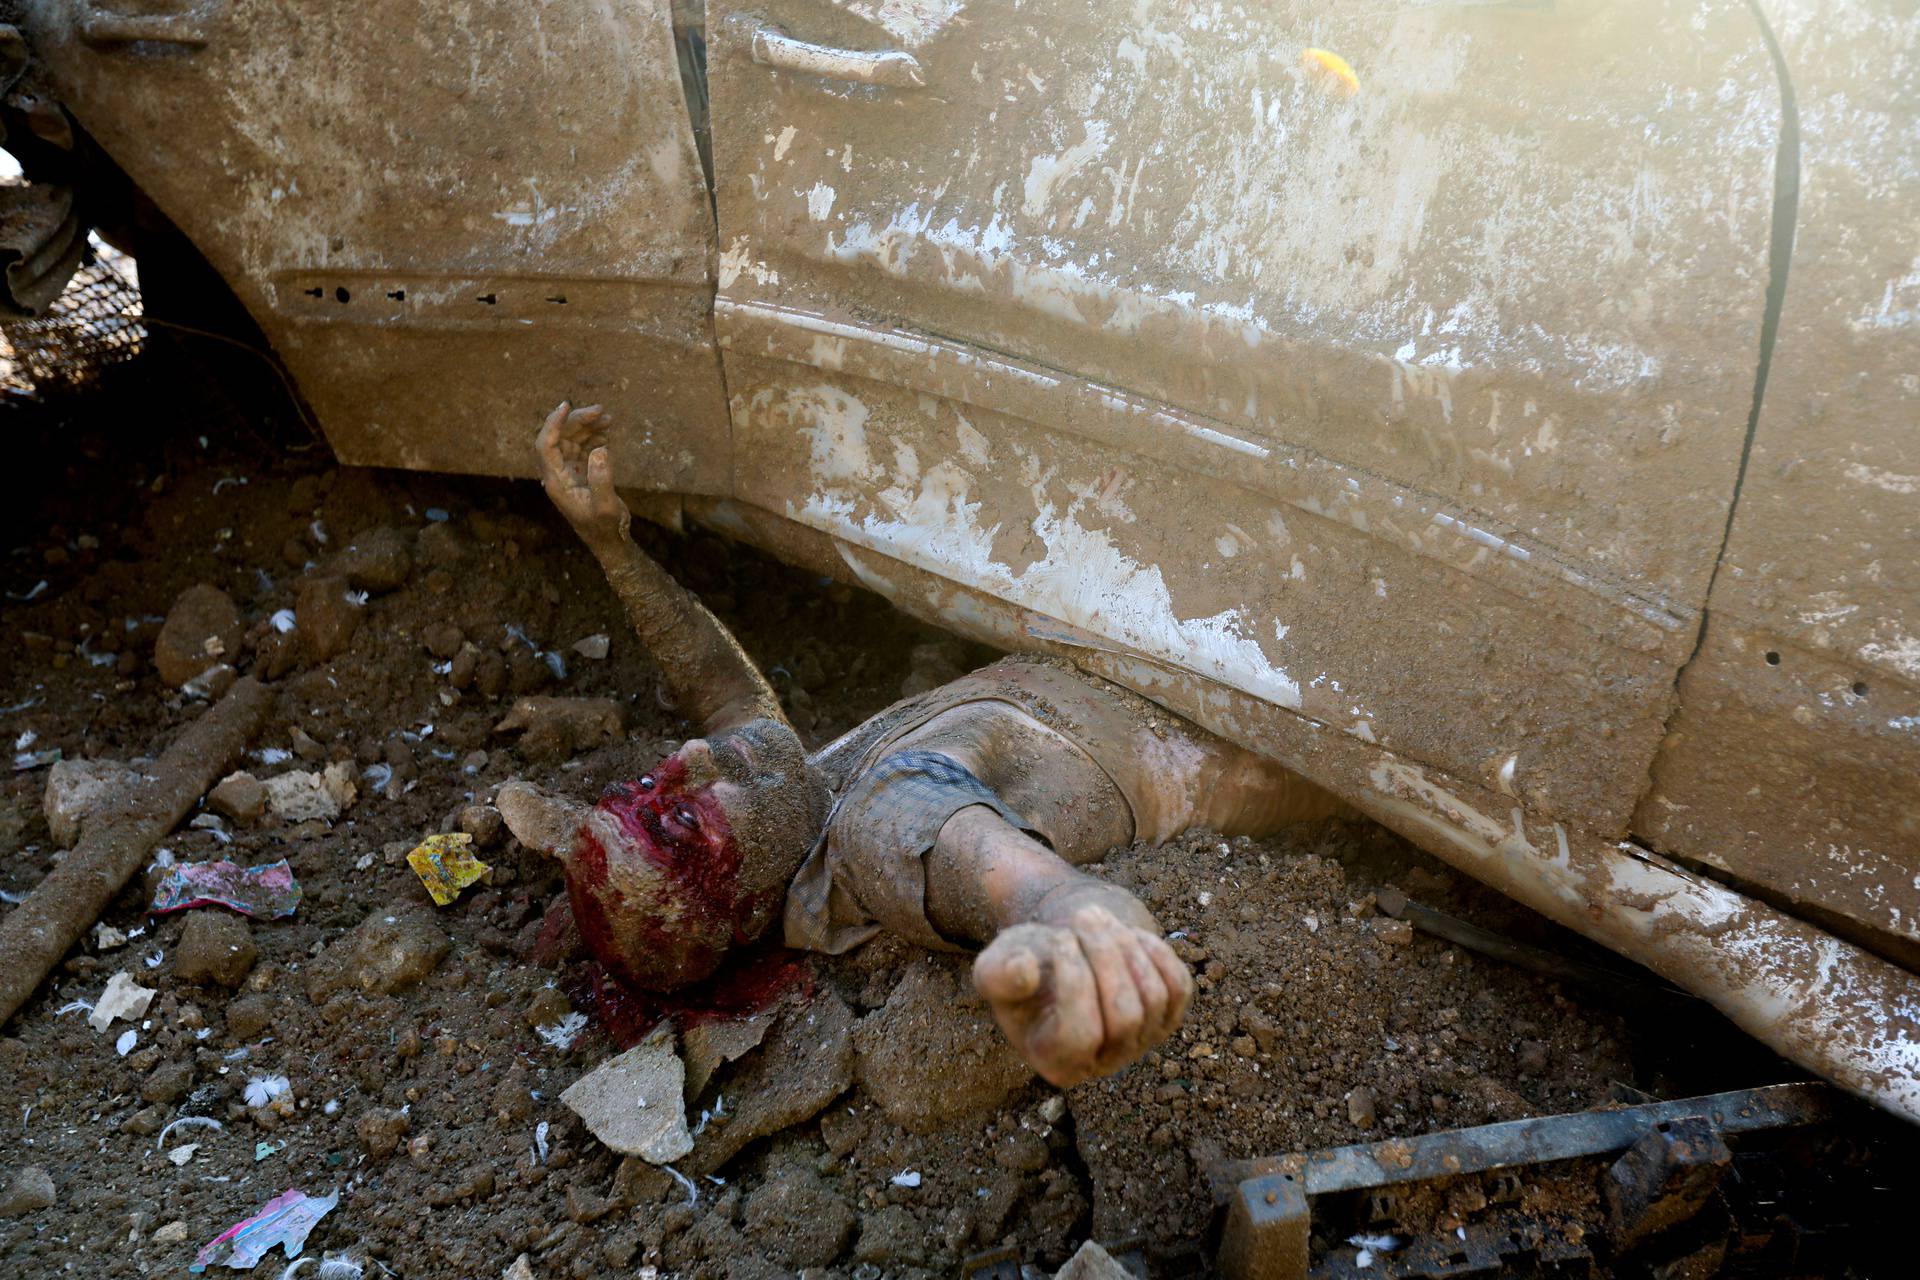 An injured man is pictured under a vehicle following an explosion in Beirut's port area